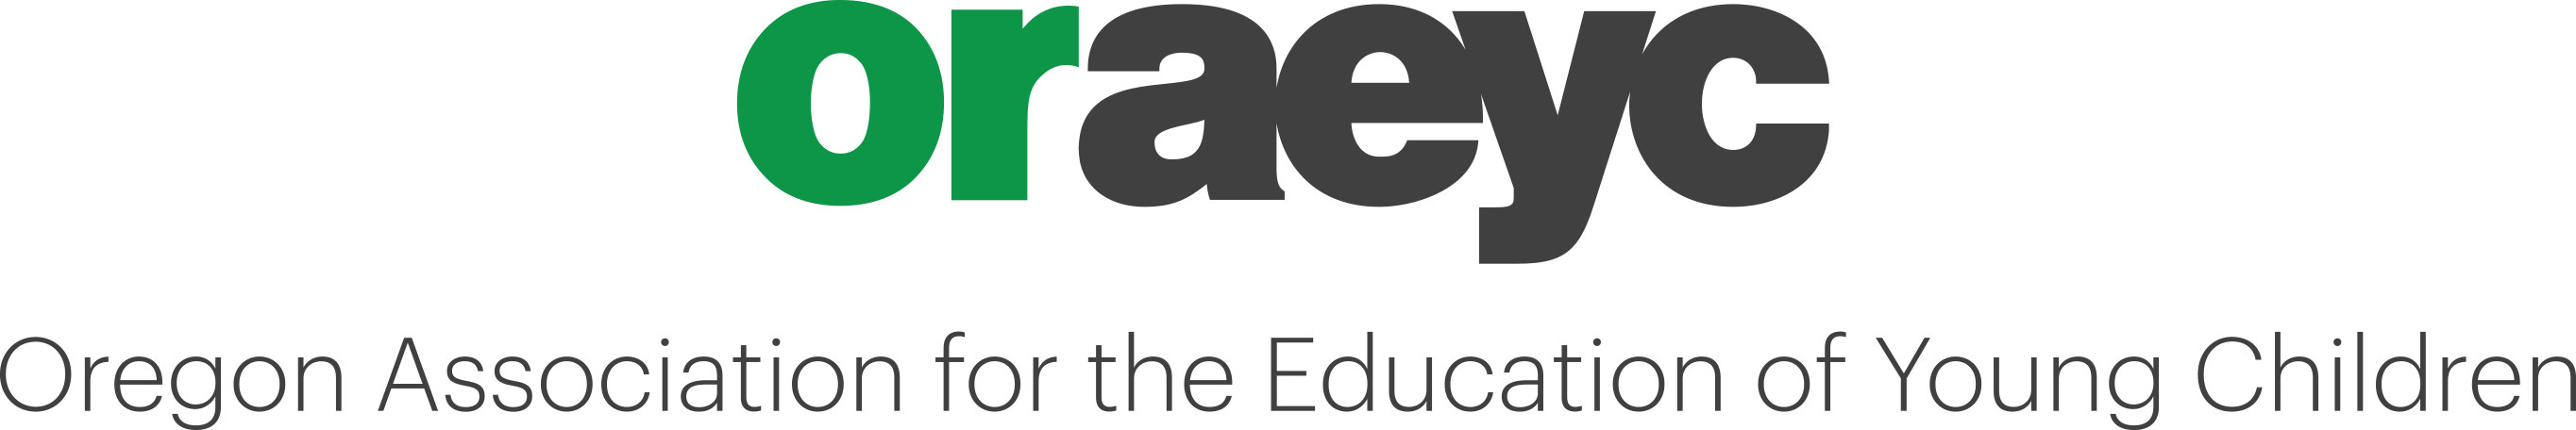 Oregon Association for the Education of Young Children Logo